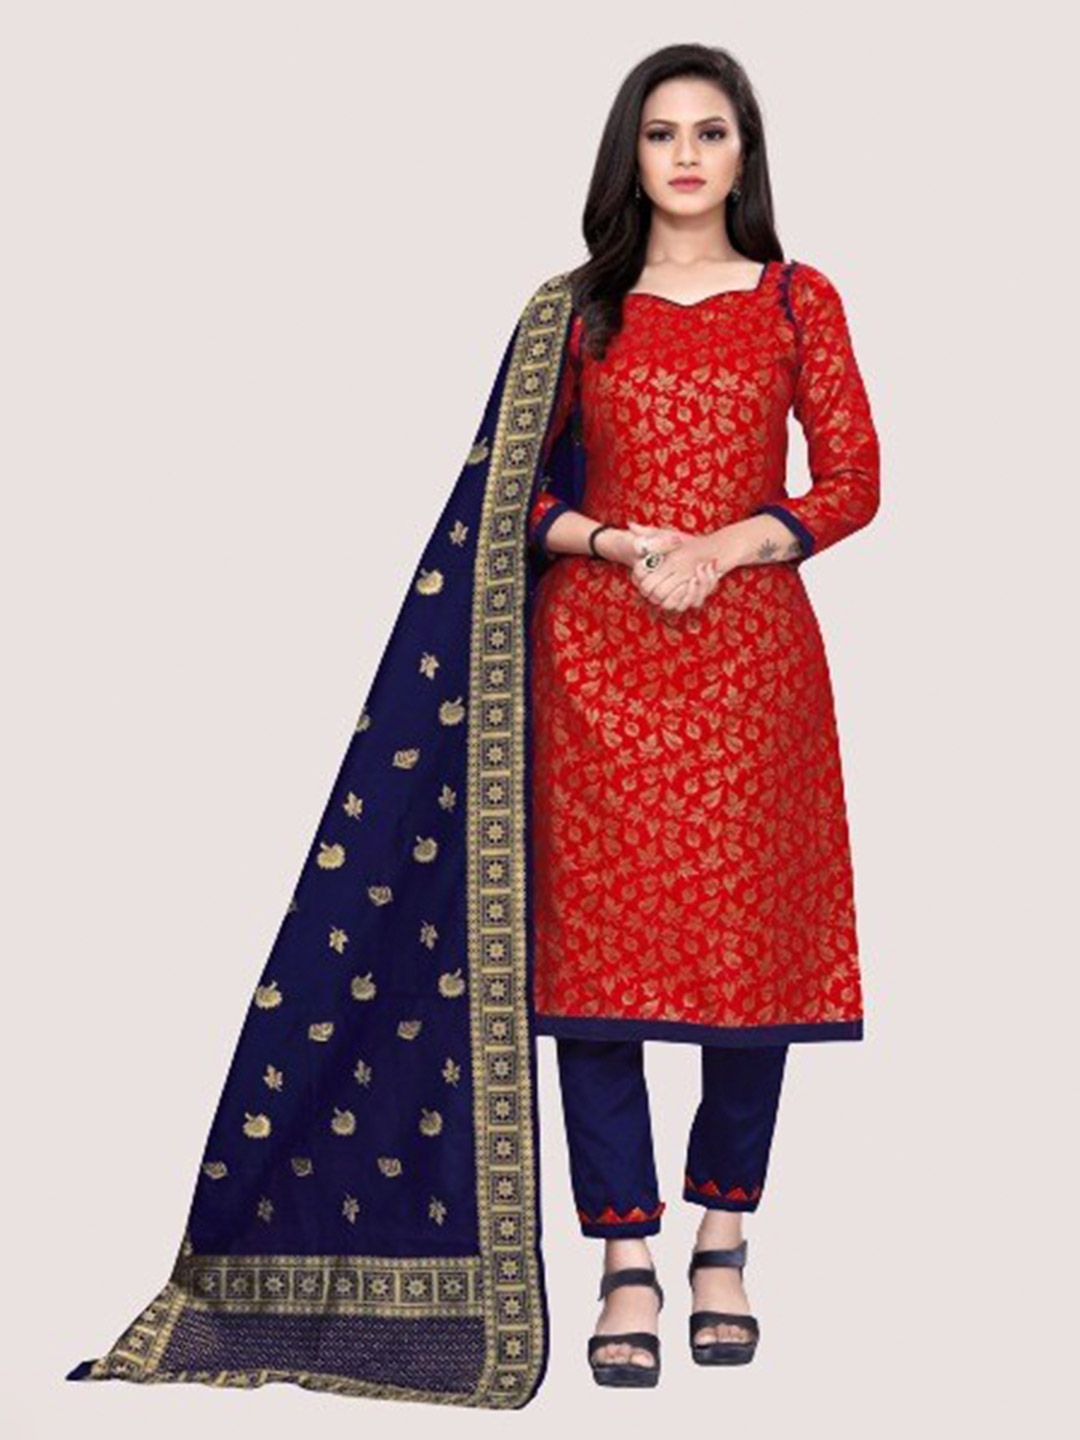 MORLY Women Red & Navy Blue Dupion Silk Unstitched Dress Material Price in India